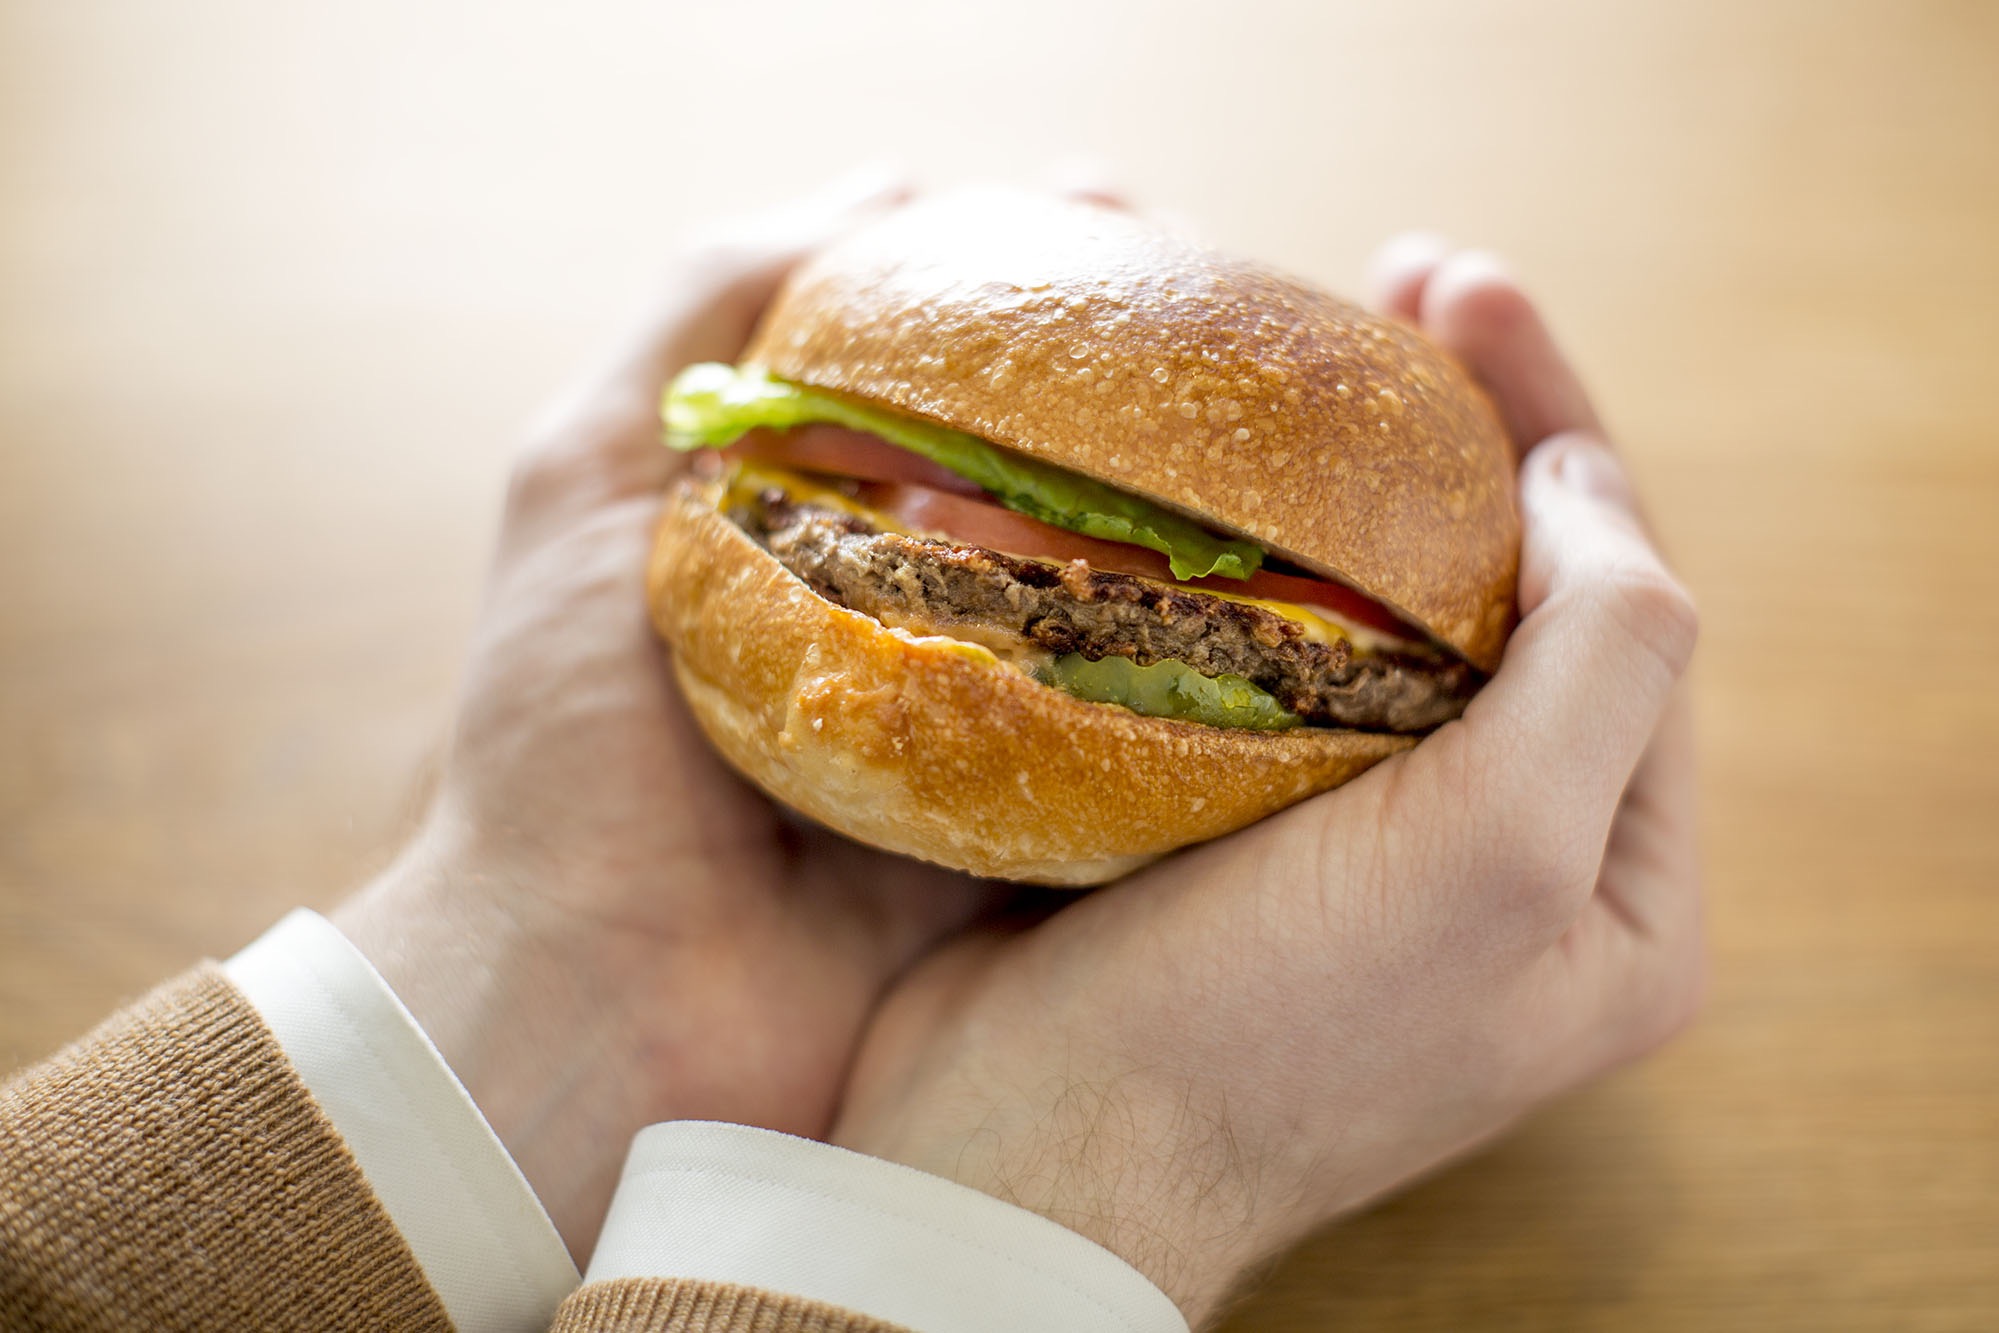 Hands holding an Impossible Burger.